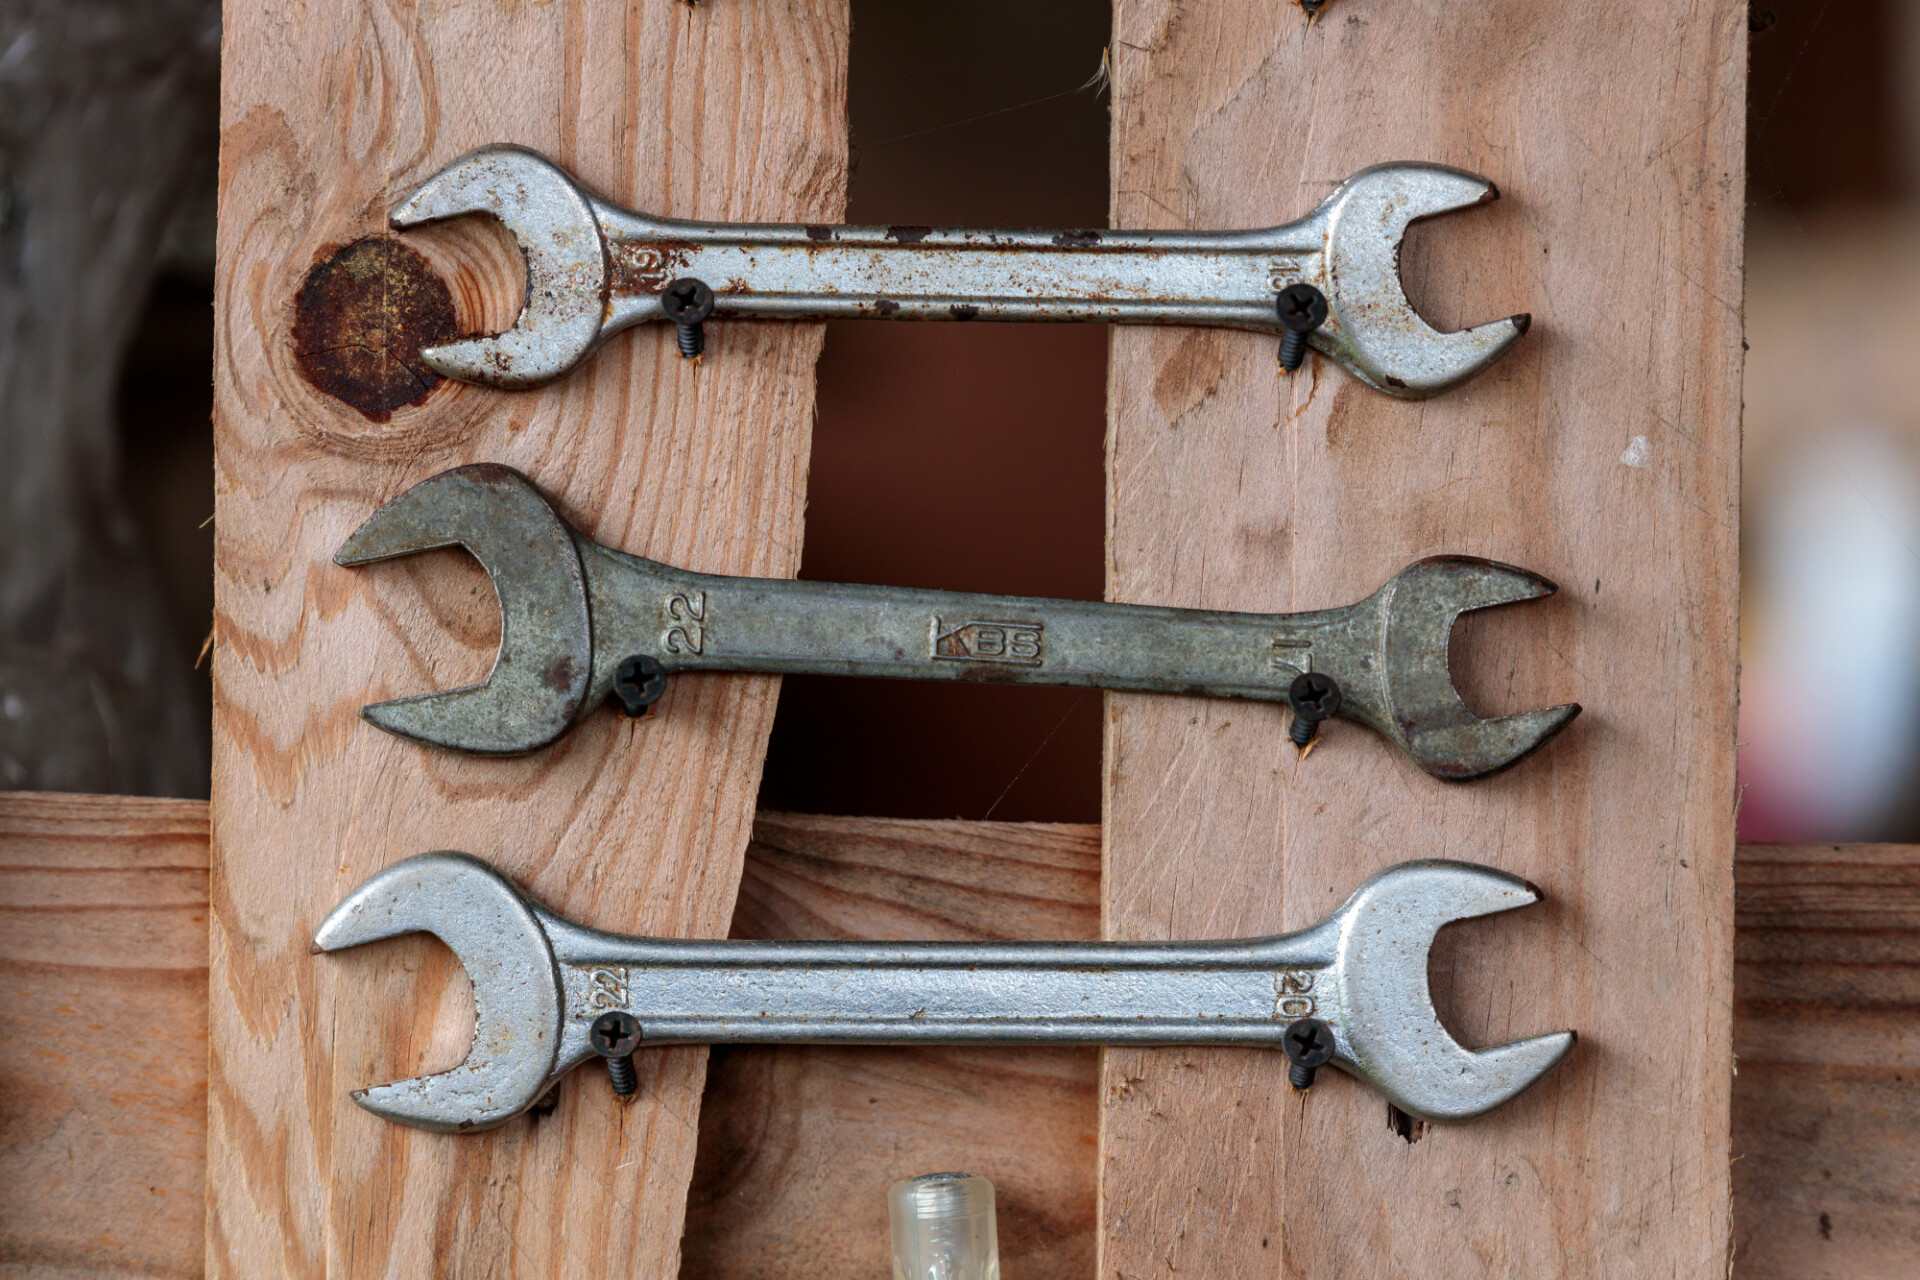 Spanners on a wooden wall